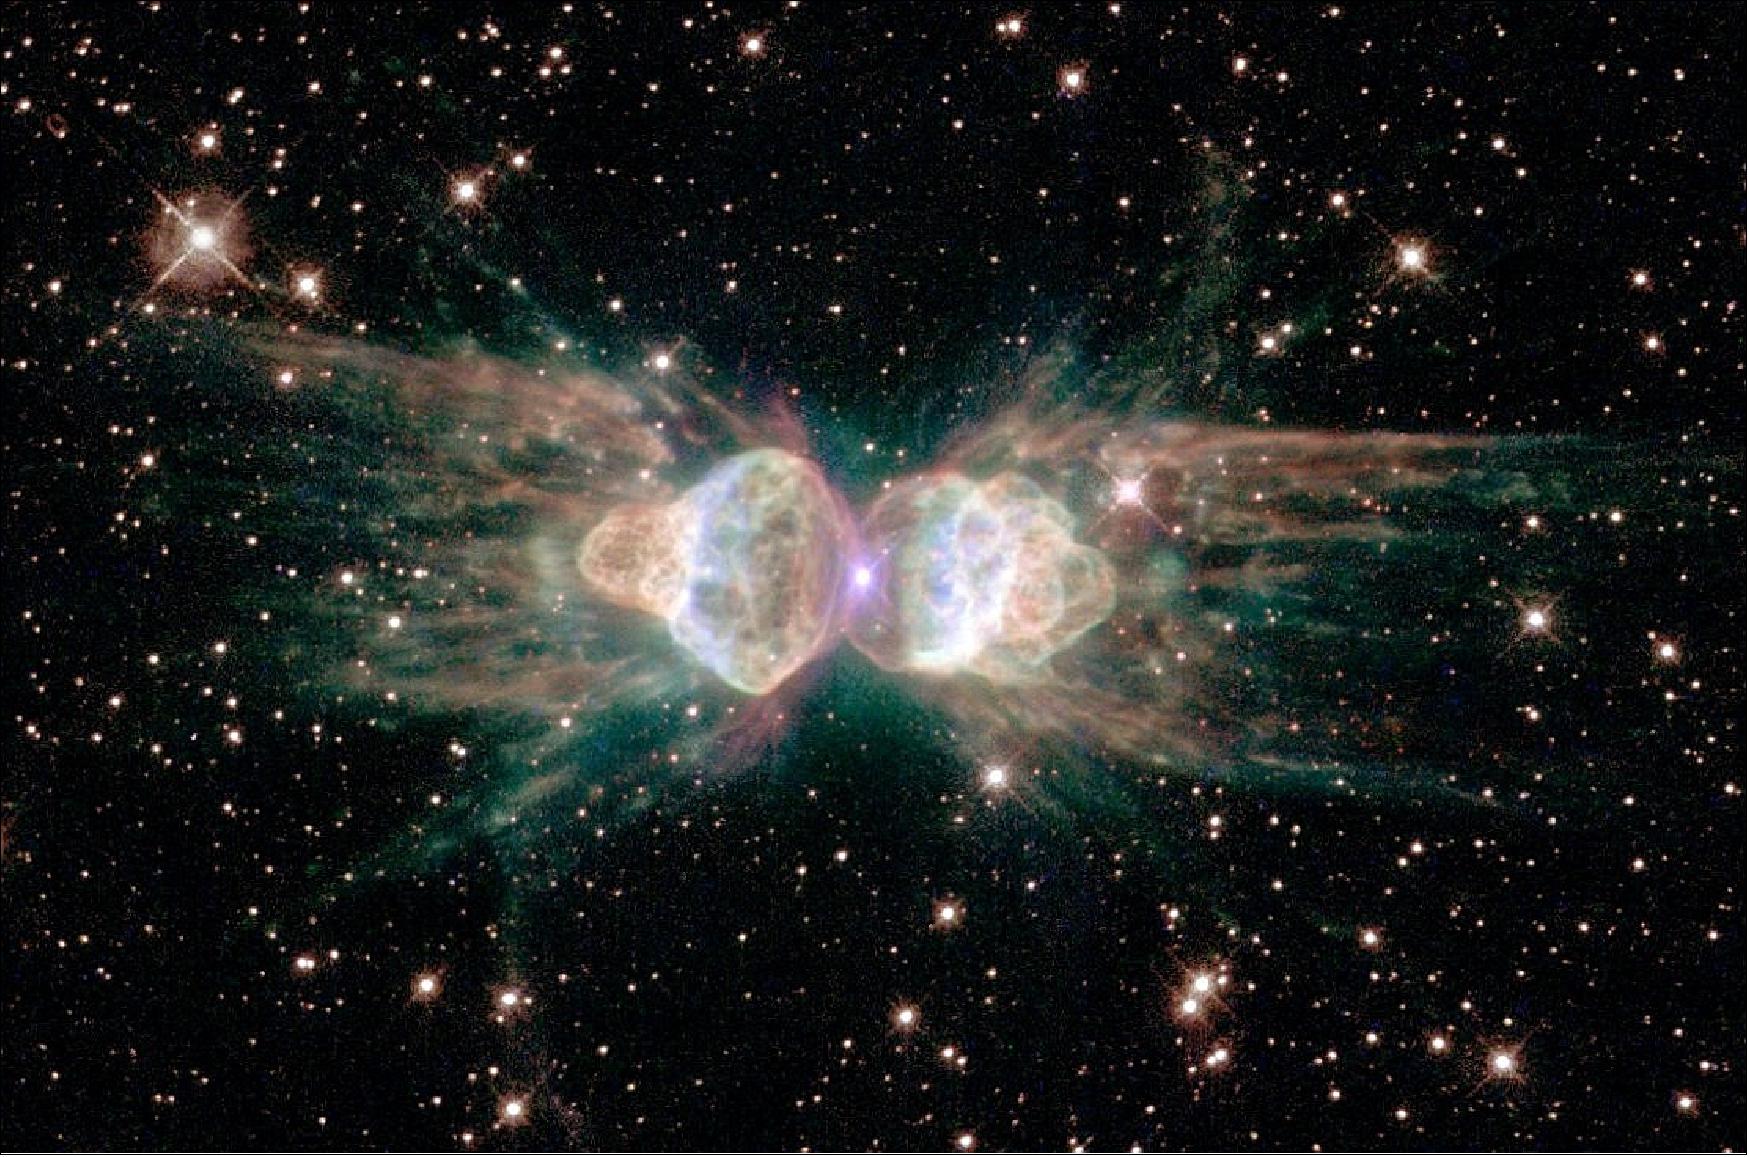 Figure 29: The Ant Nebula, as imaged by the NASA/ESA Hubble Space Telescope, resembles the head and body of a garden ant. In reality, it is the result of a dying Sun-like star and complex interactions of material at its heart (image credit: NASA, ESA and the Hubble Heritage Team (STScI/AURA)